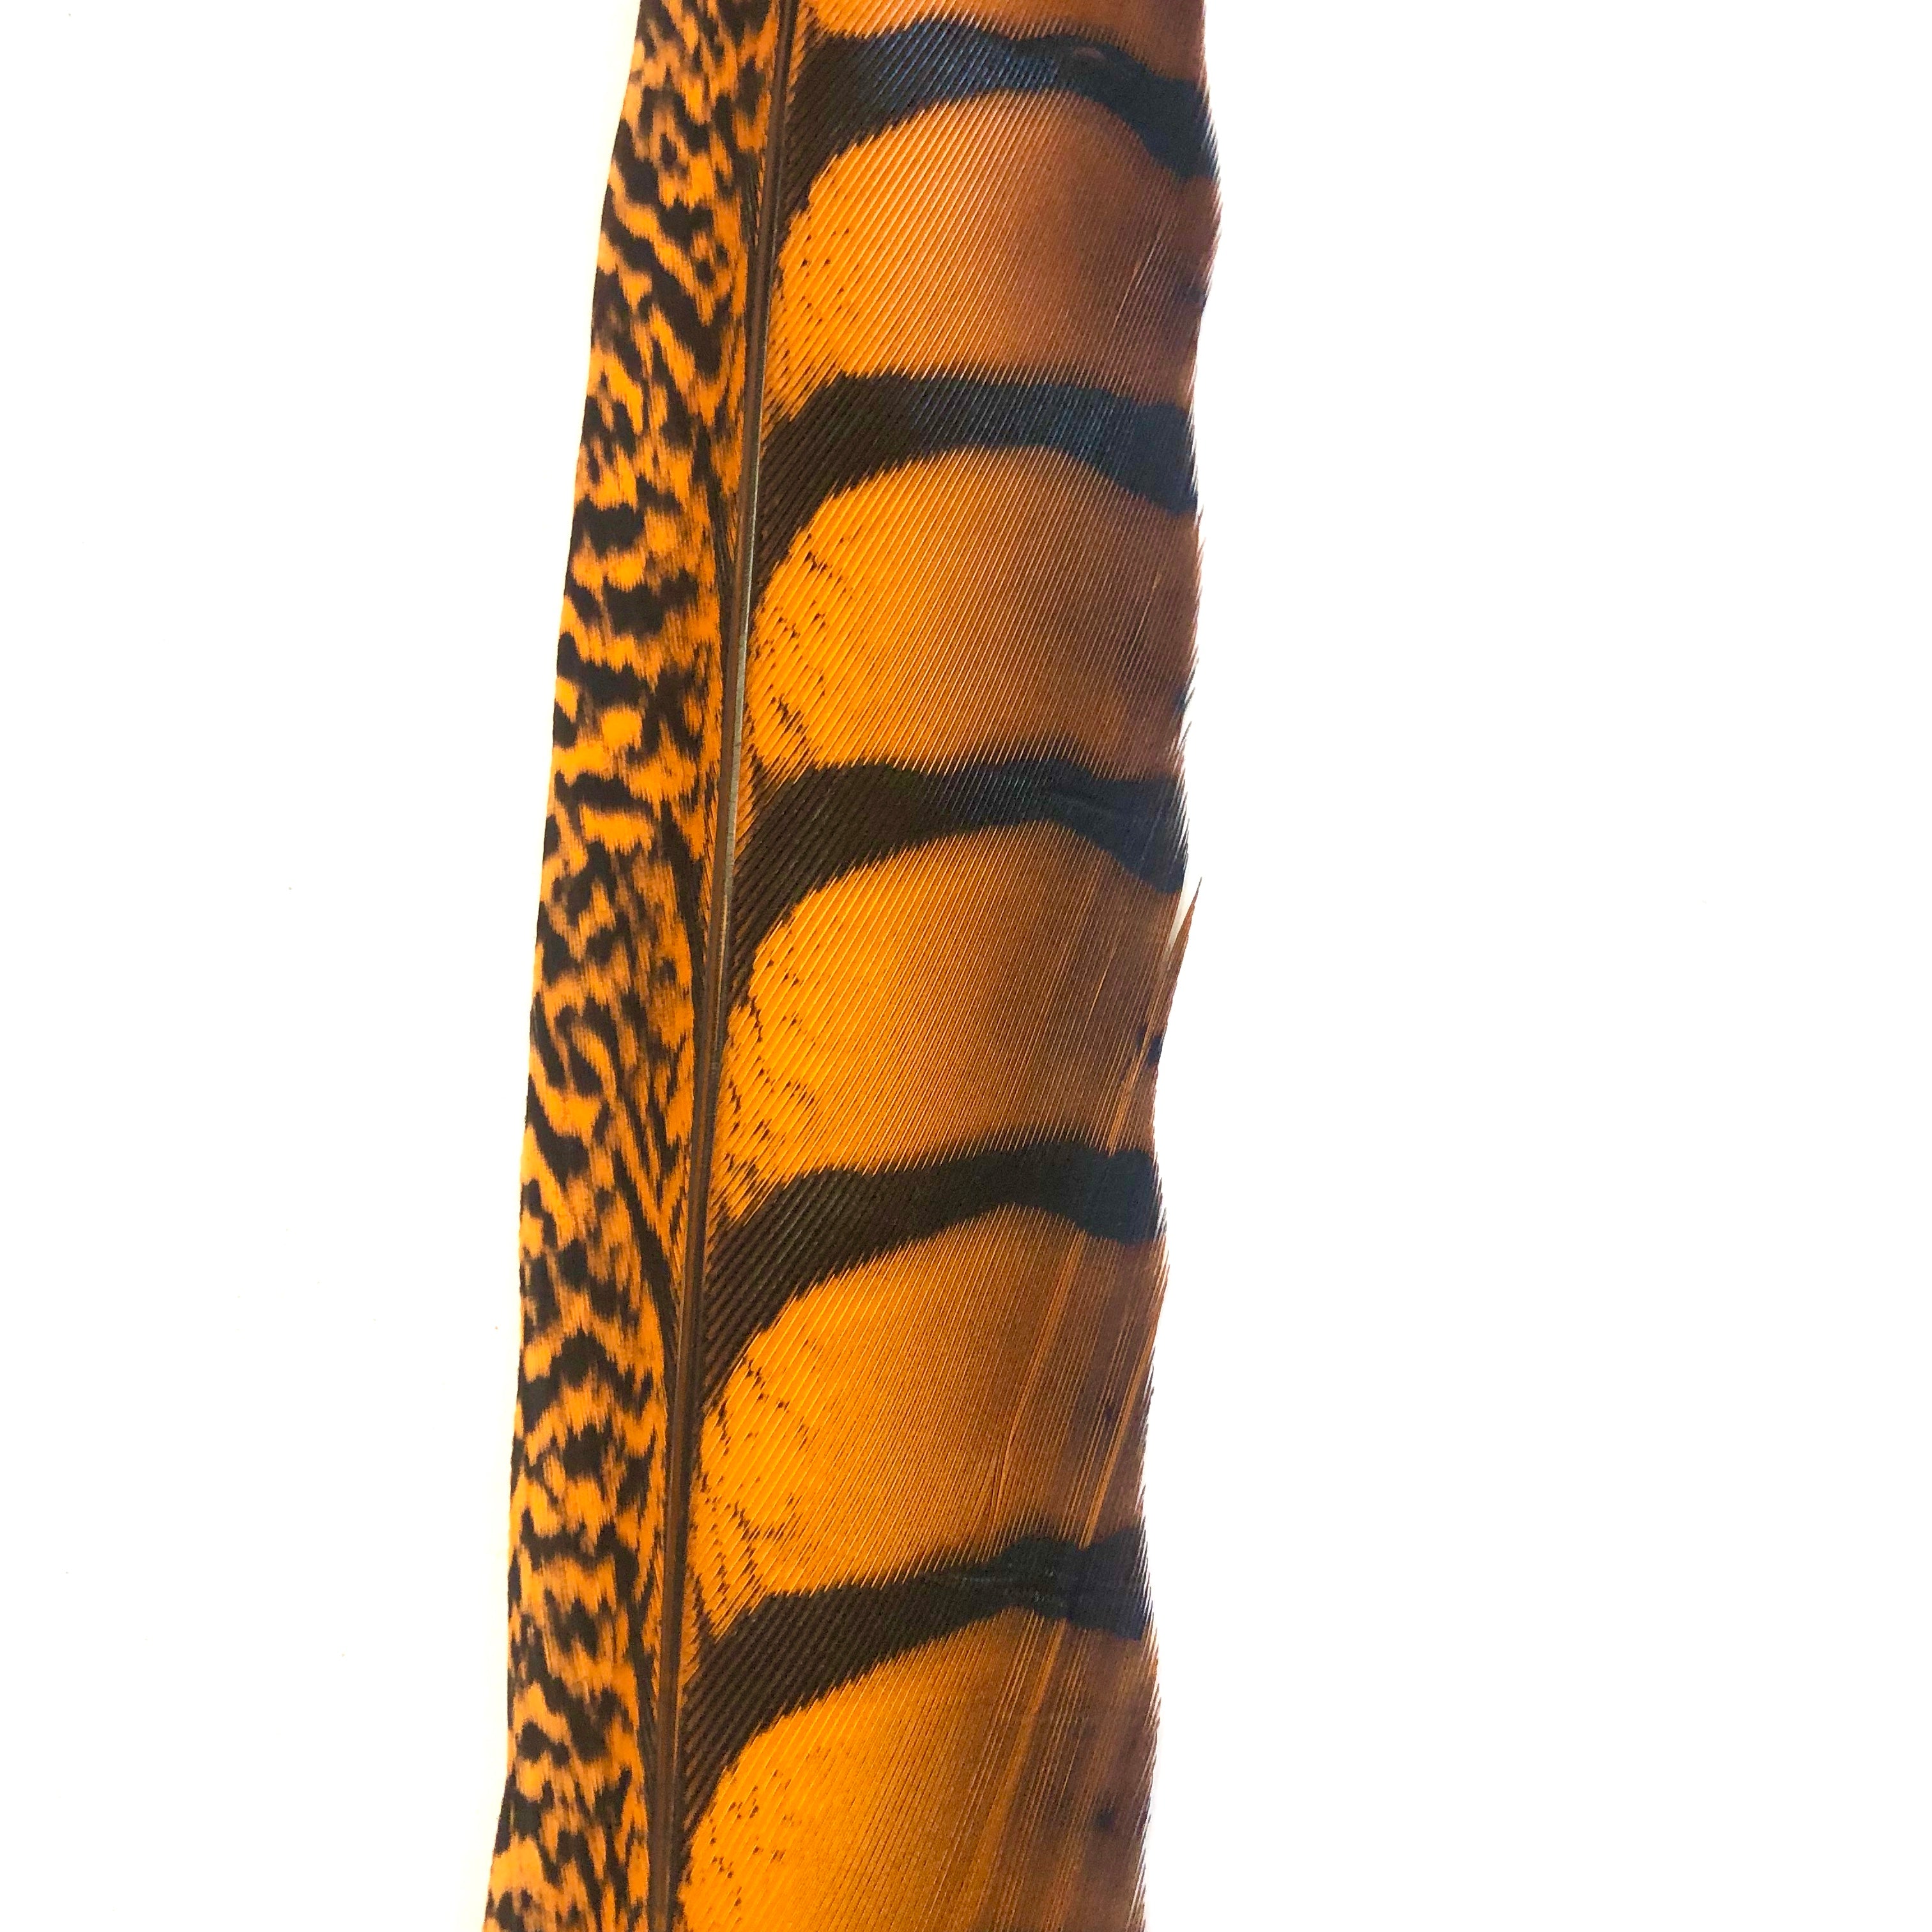 30" to 38" Lady Amherst Pheasant Side Tail Feather - Orange ((SECONDS))